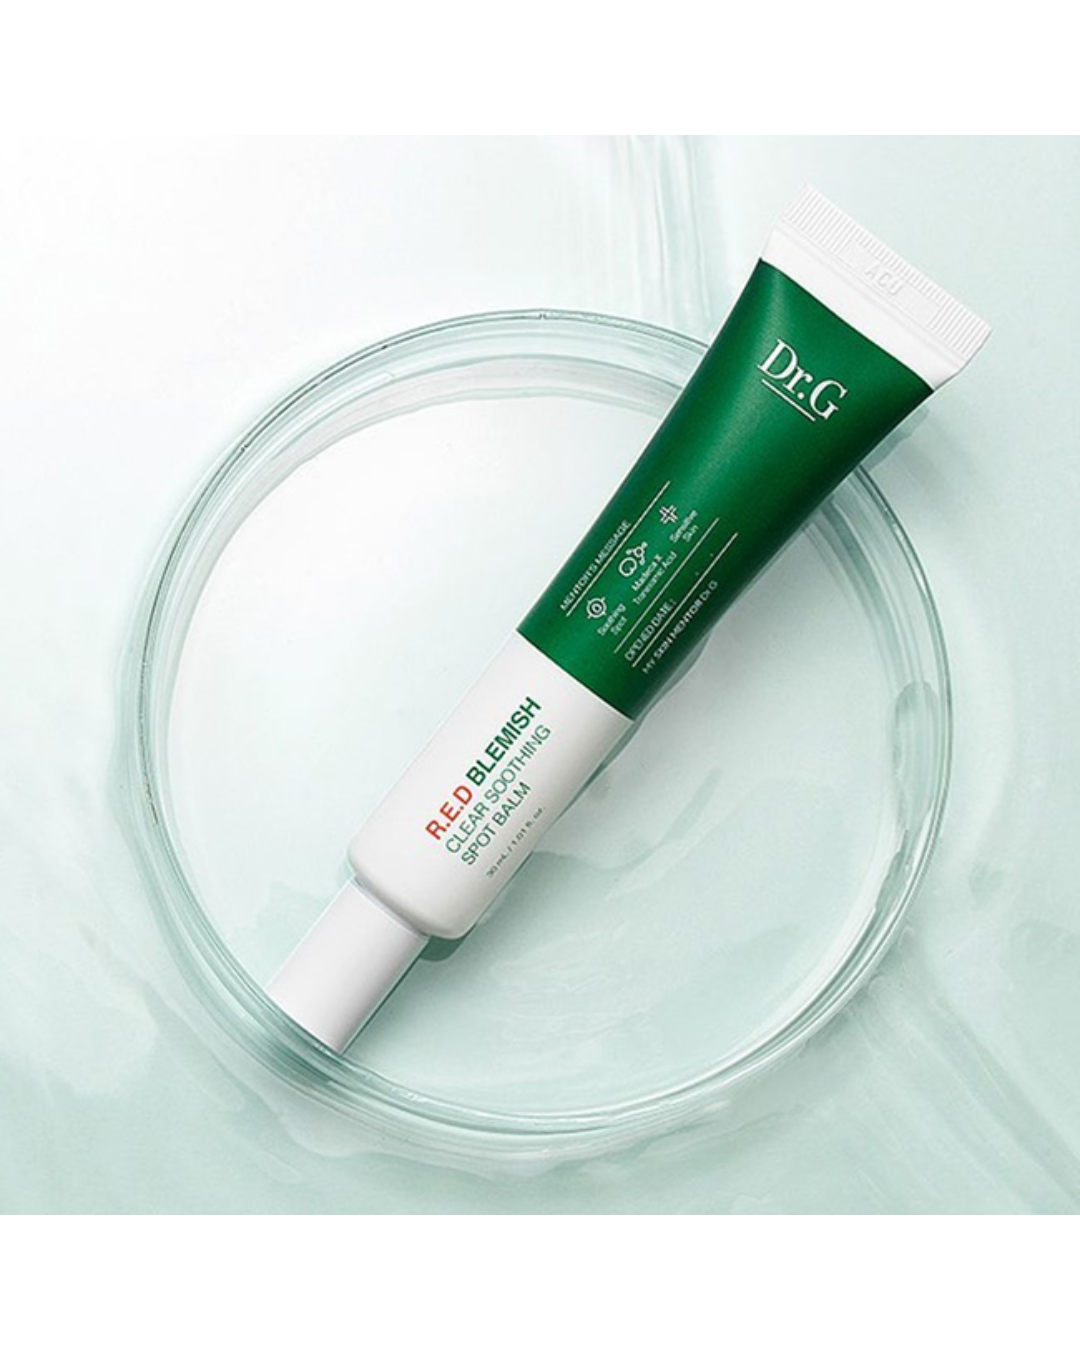 Dr G Red Clear Soothing Spot Balm